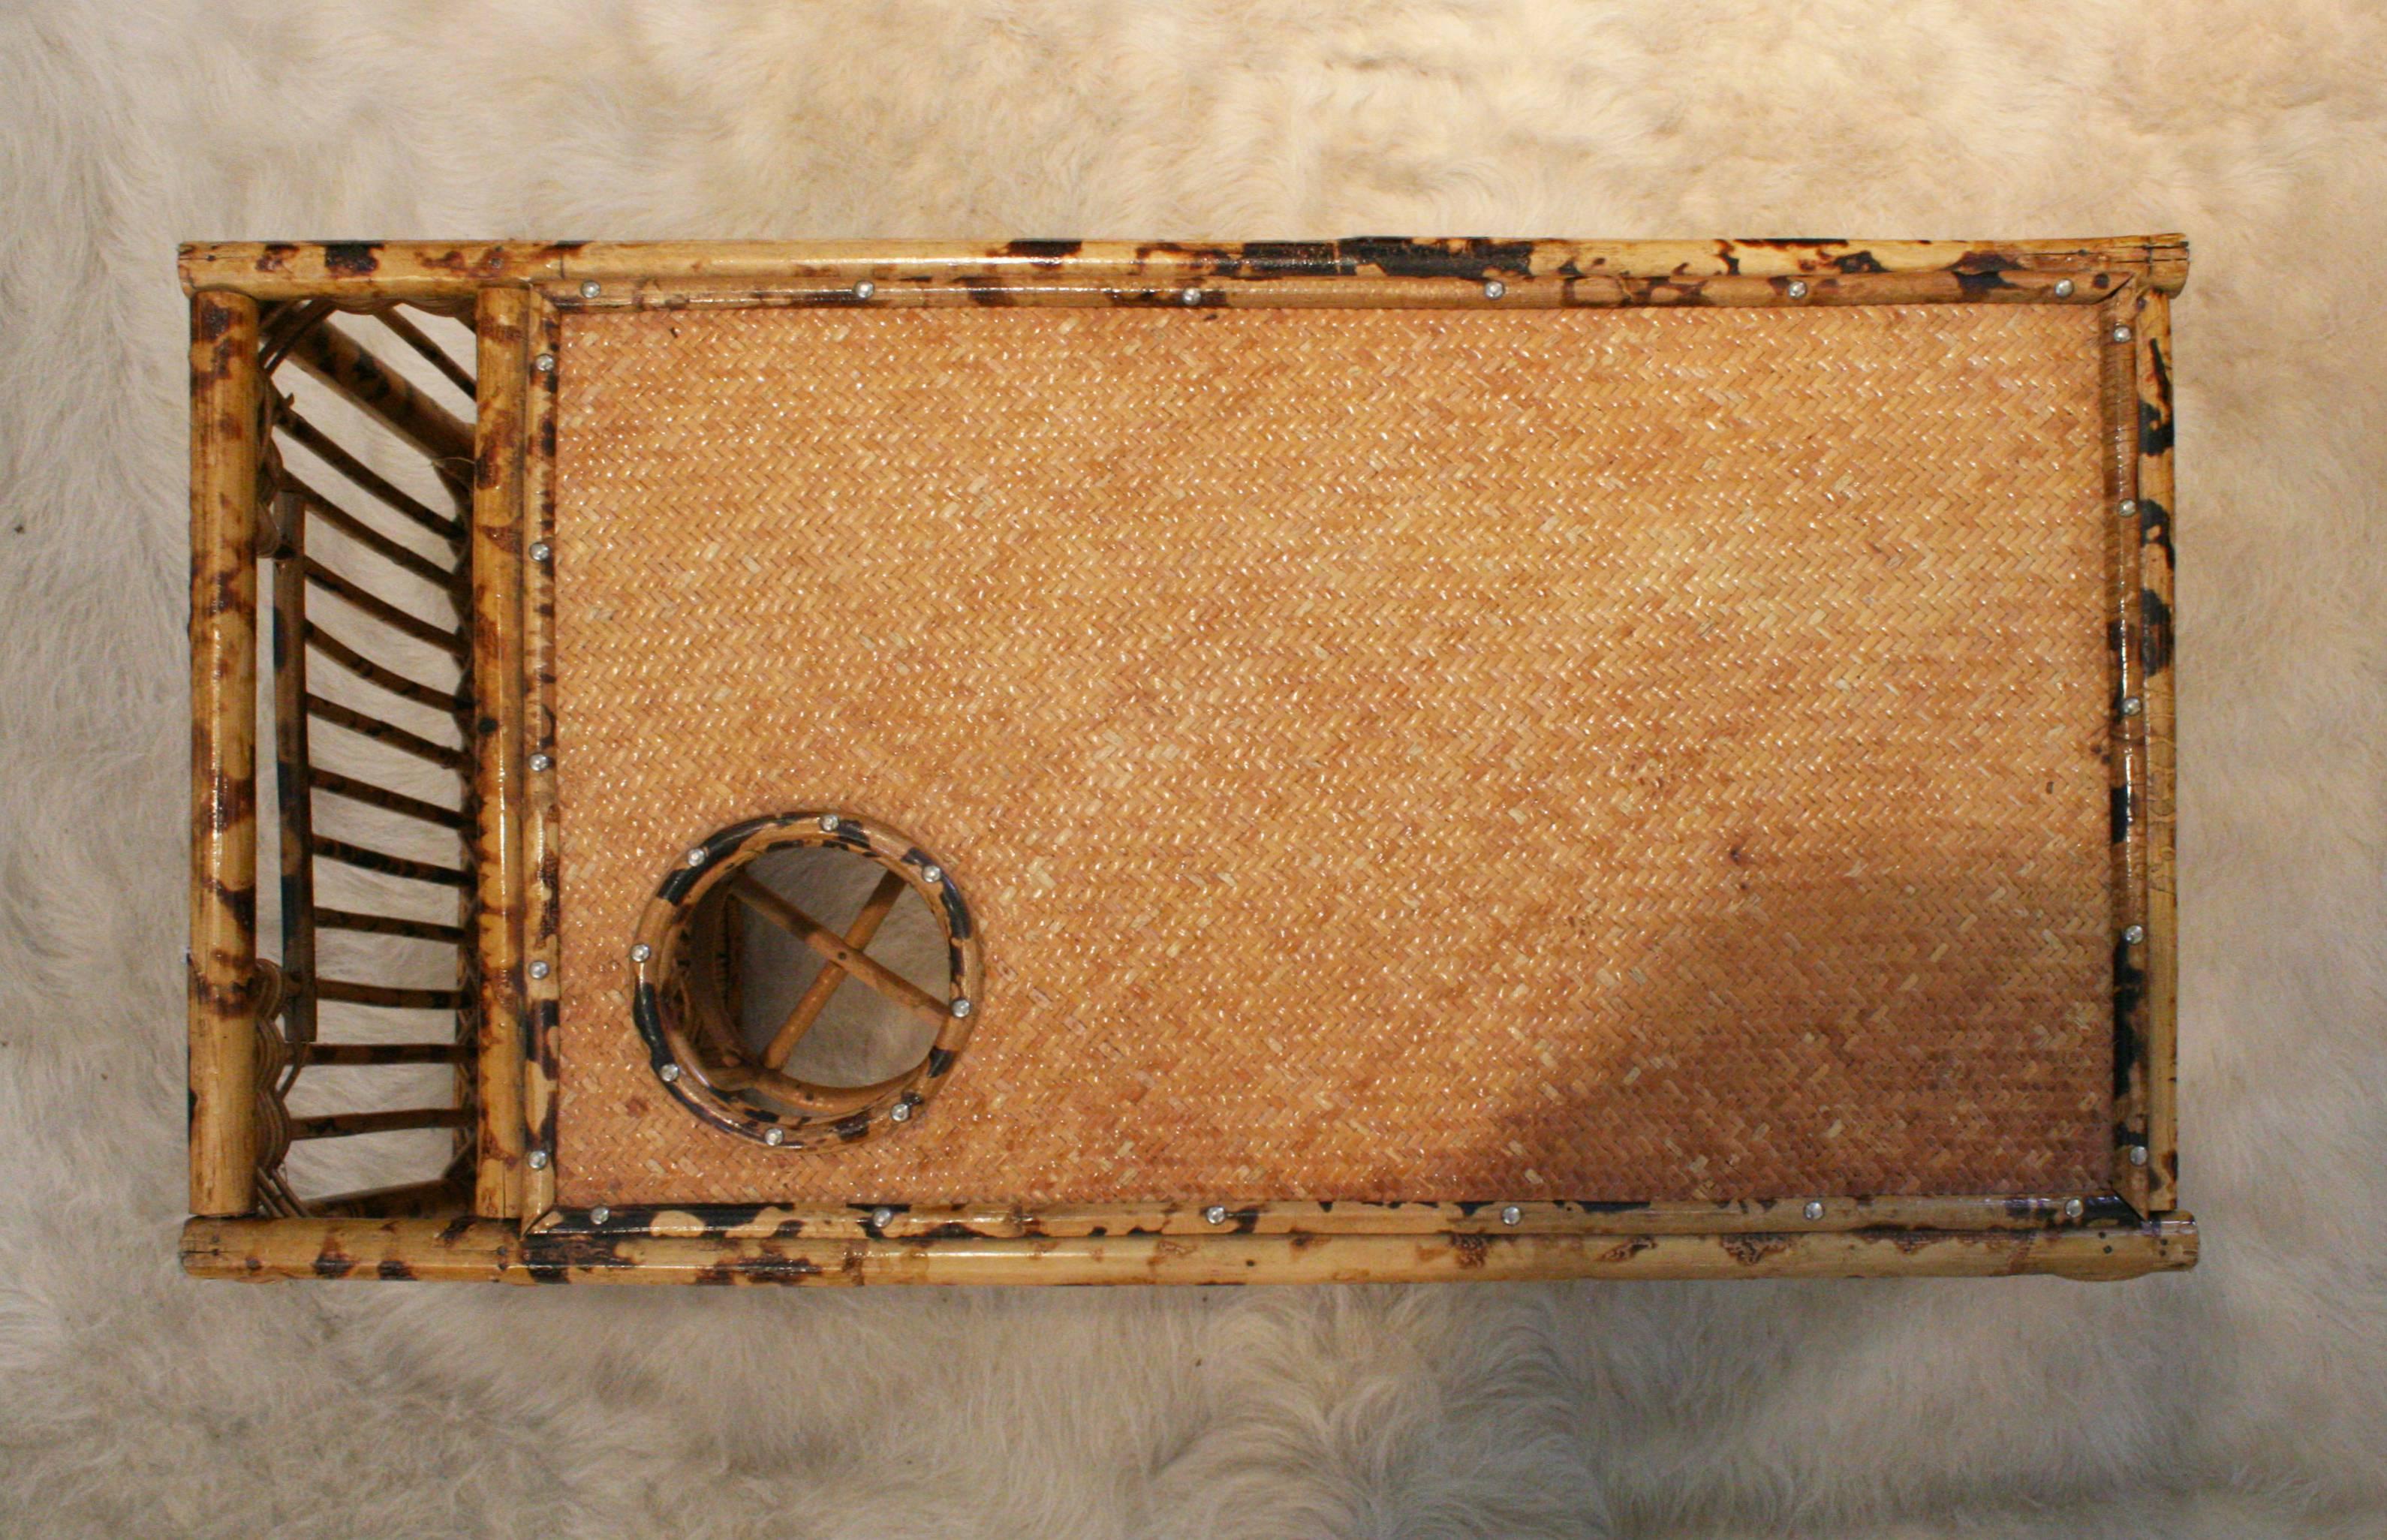 Bamboo and wicker rattan bed tray from the mid-20th century.